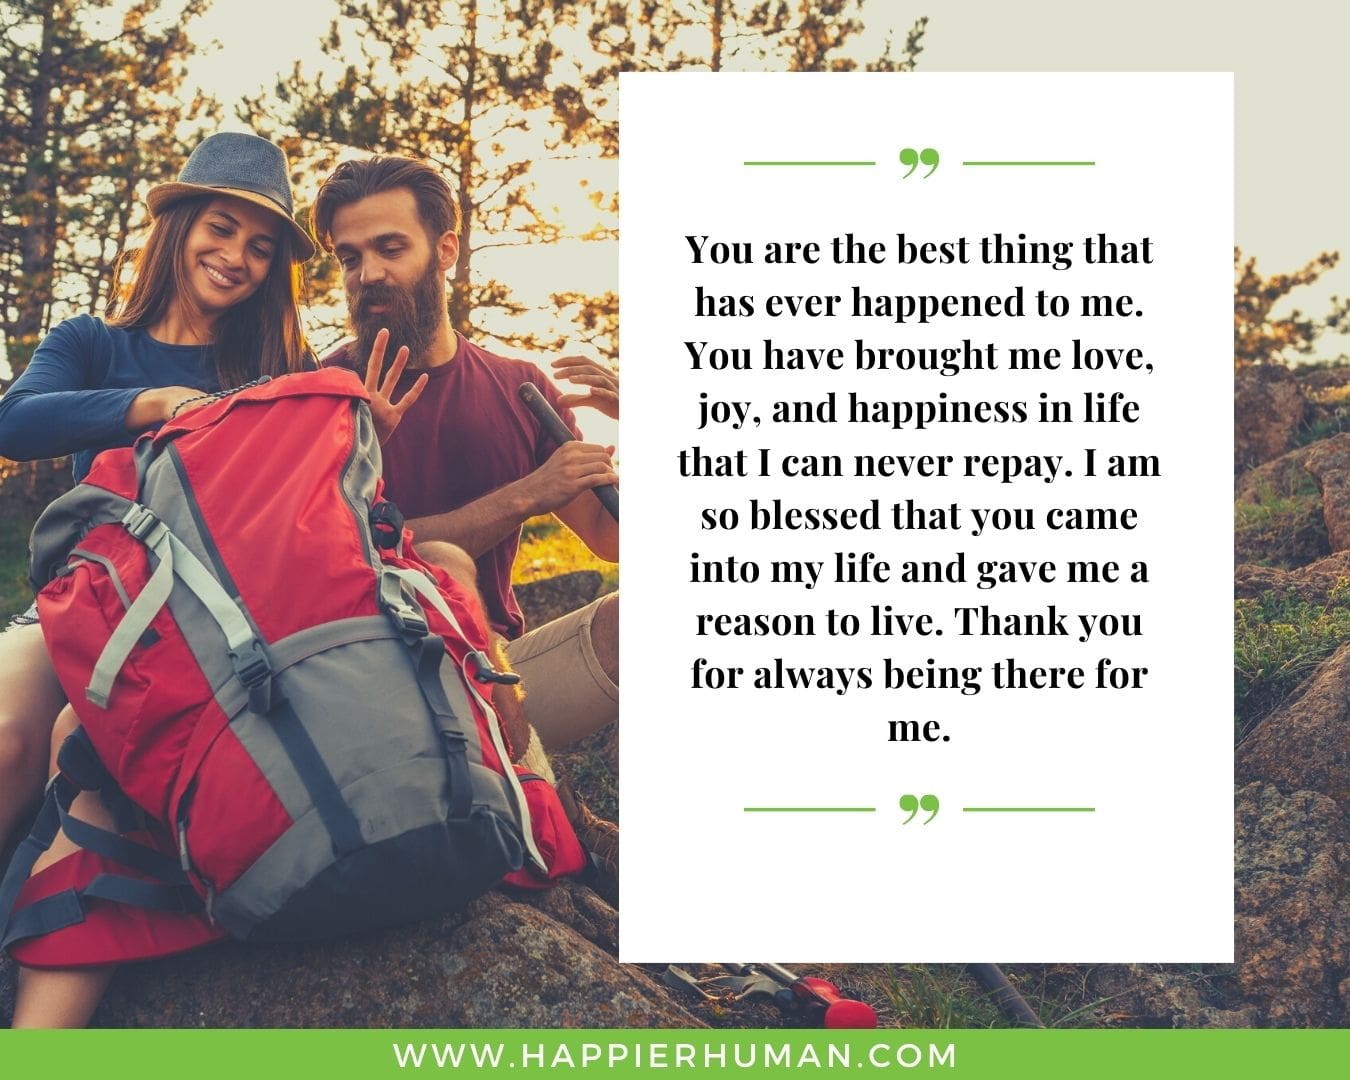 I’m Here for You Quotes - “You are the best thing that has ever happened to me. You have brought me love, joy, and happiness in life that I can never repay. I am so blessed that you came into my life and gave me a reason to live. Thank you for always being there for me.”